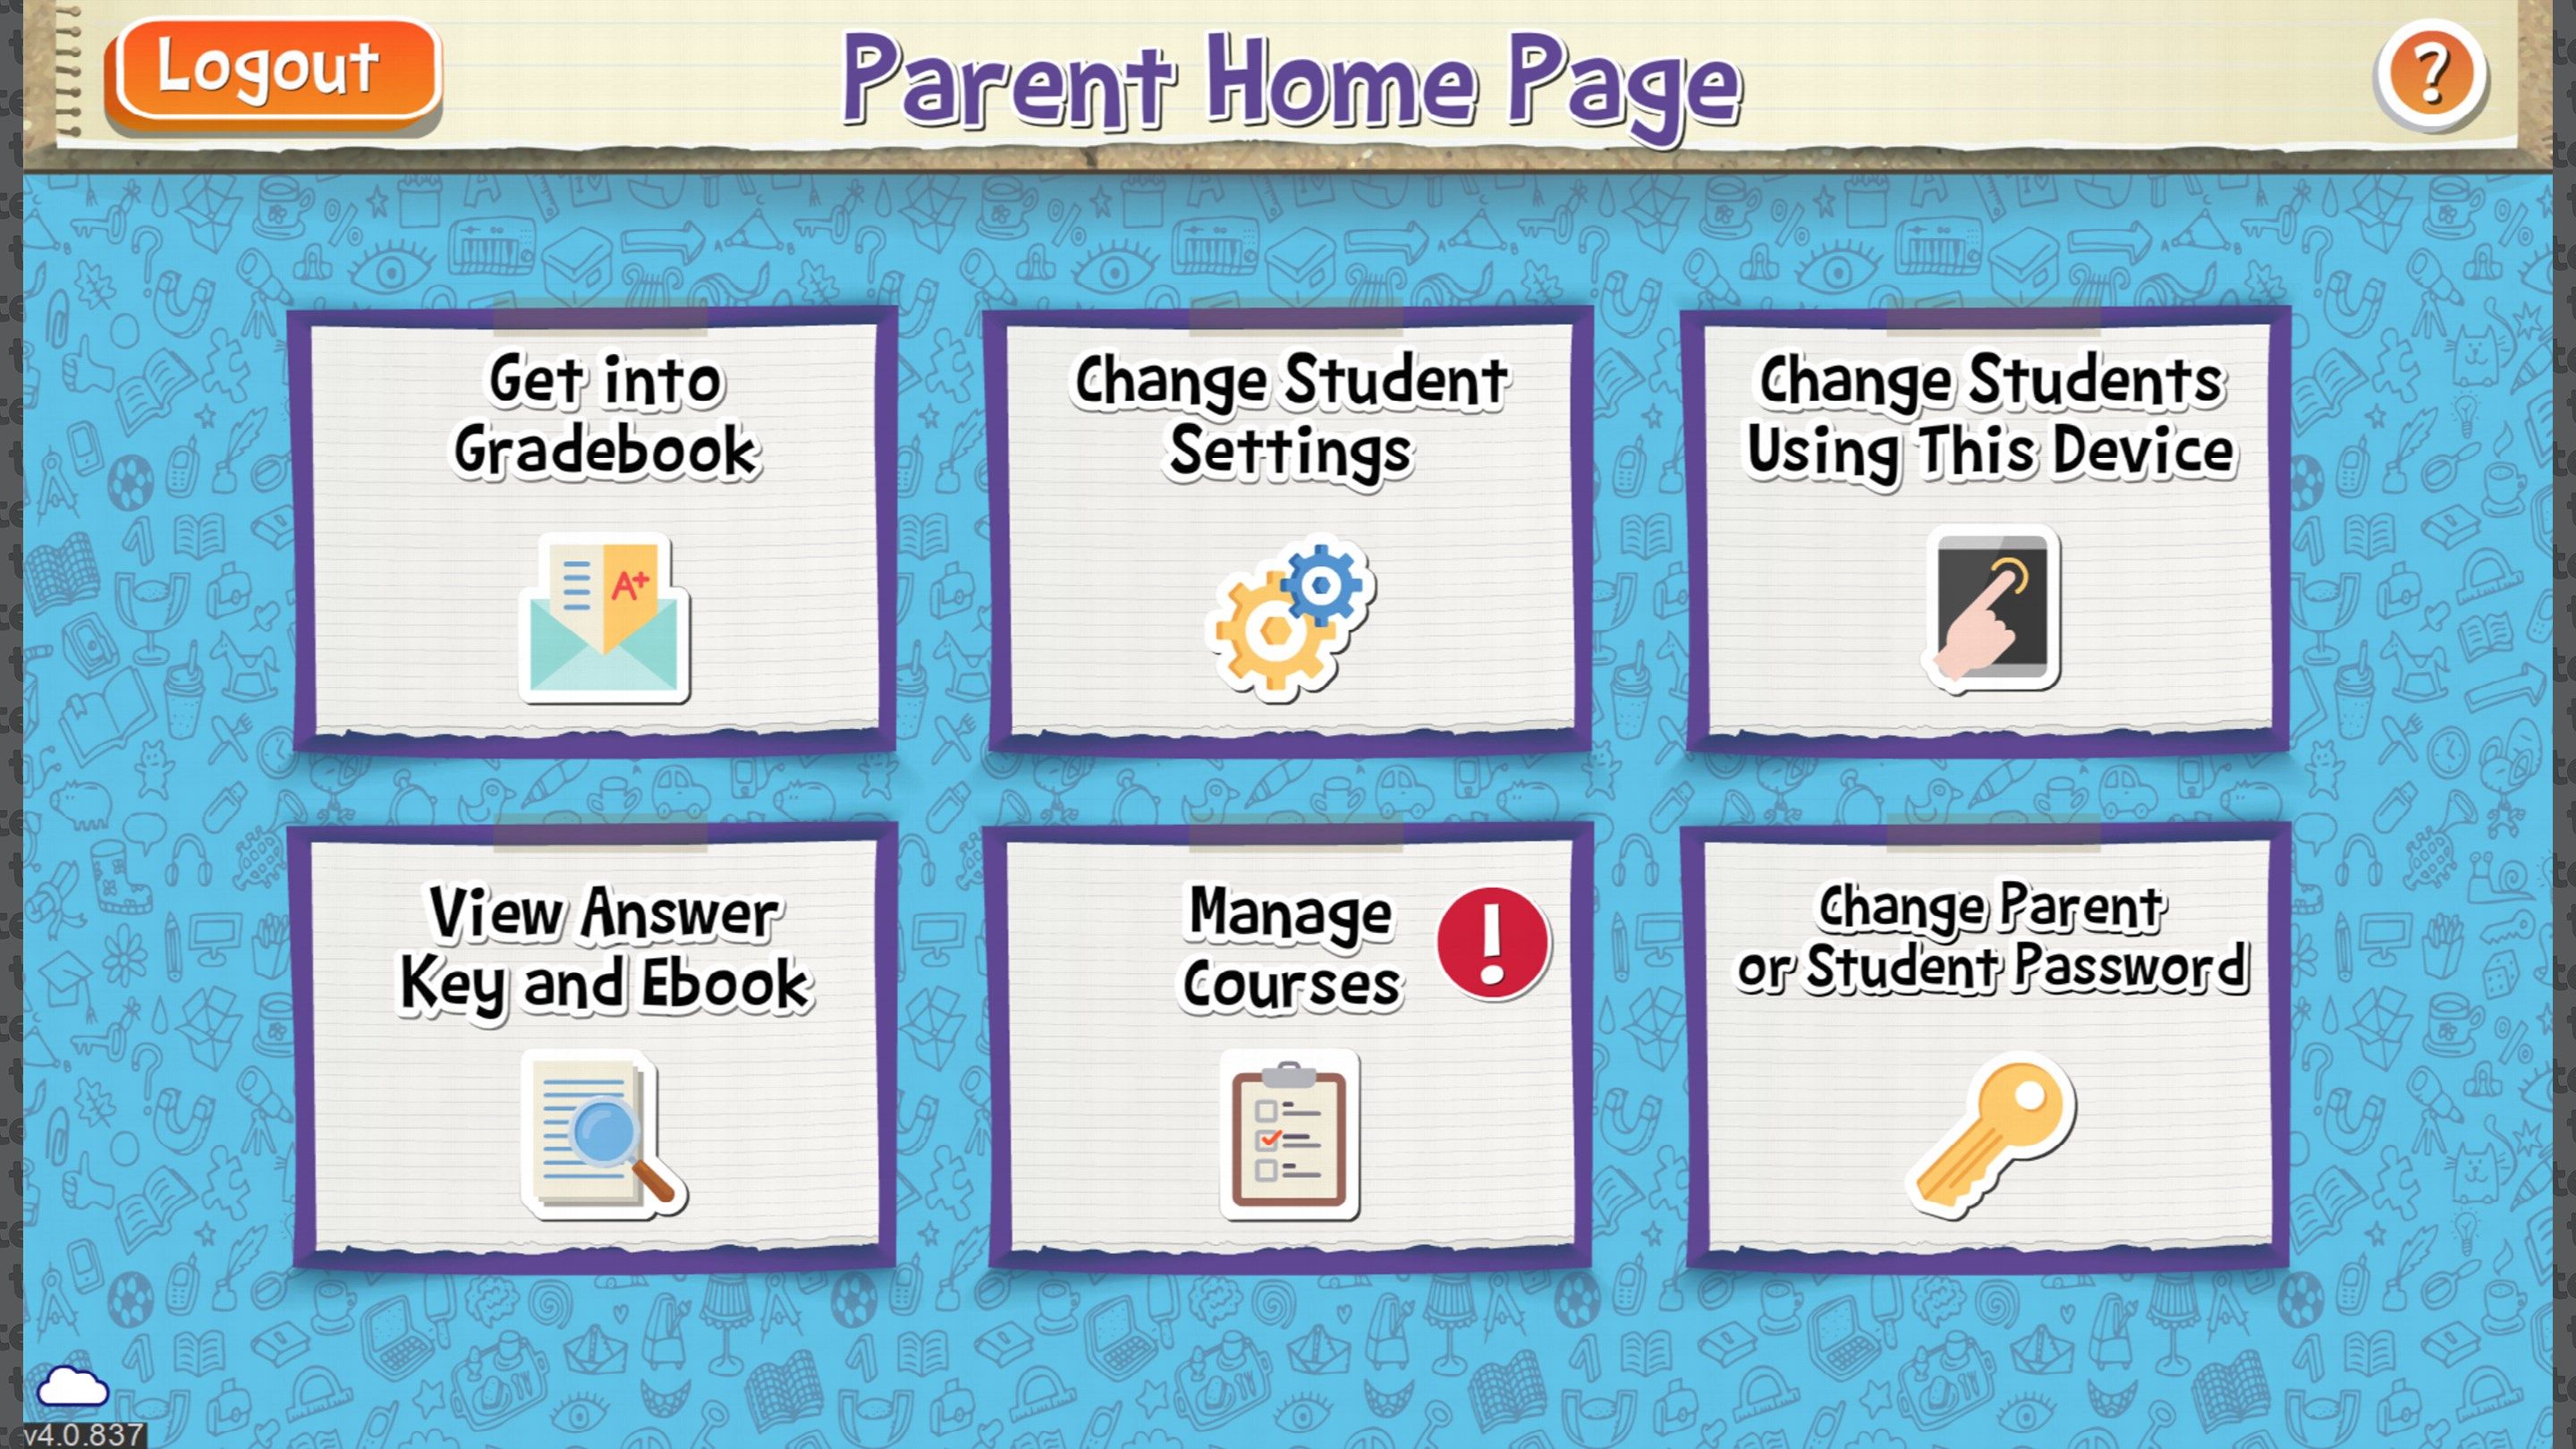 From the Parent Home Page, you can monitor your students’ progress, manage your courses, and set preferences.